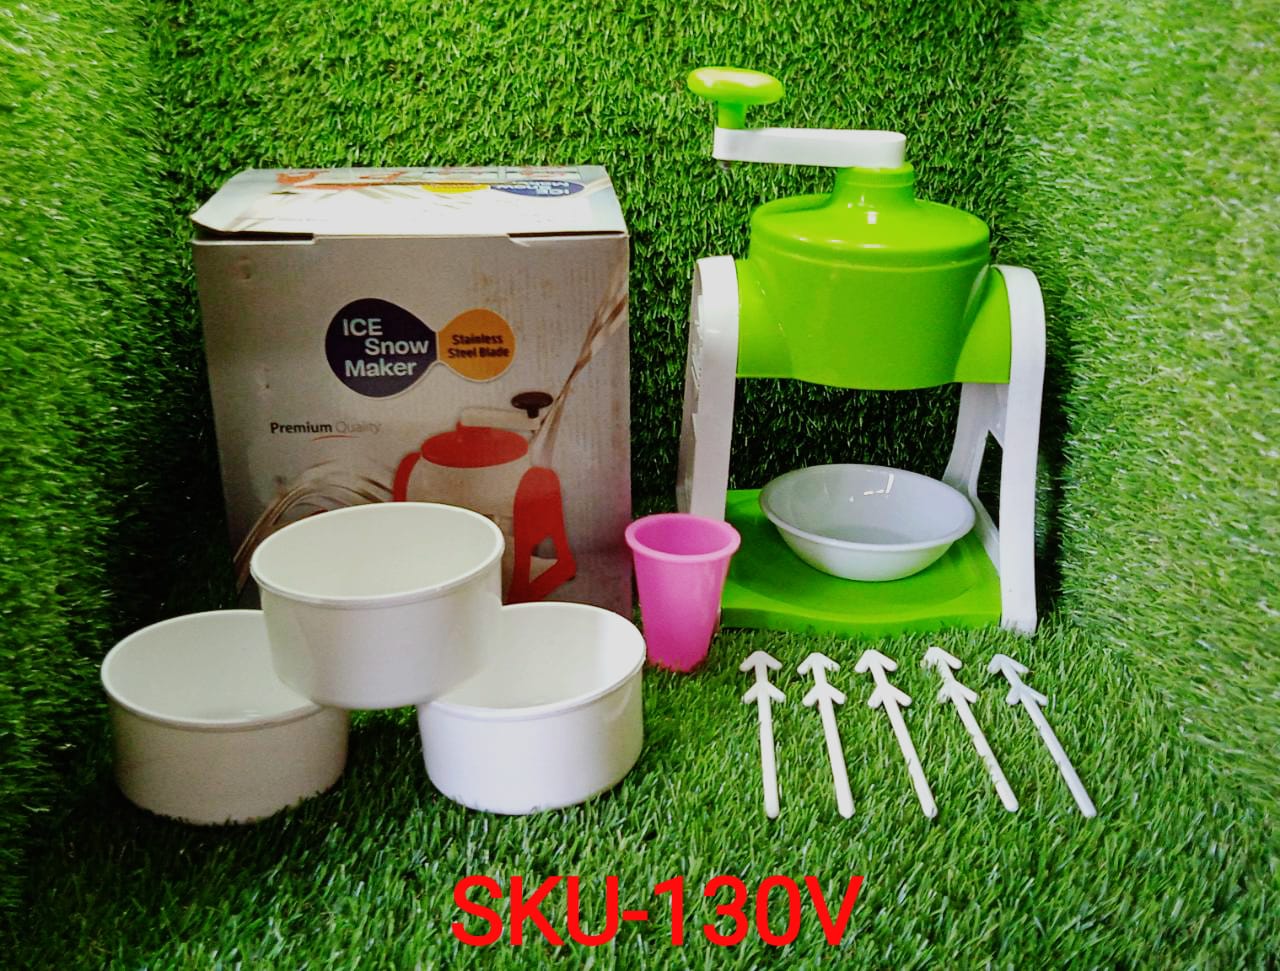 0130 V CB Green Gola Maker Used For Making Ice Golas During Hot And Summer Conditions. DeoDap